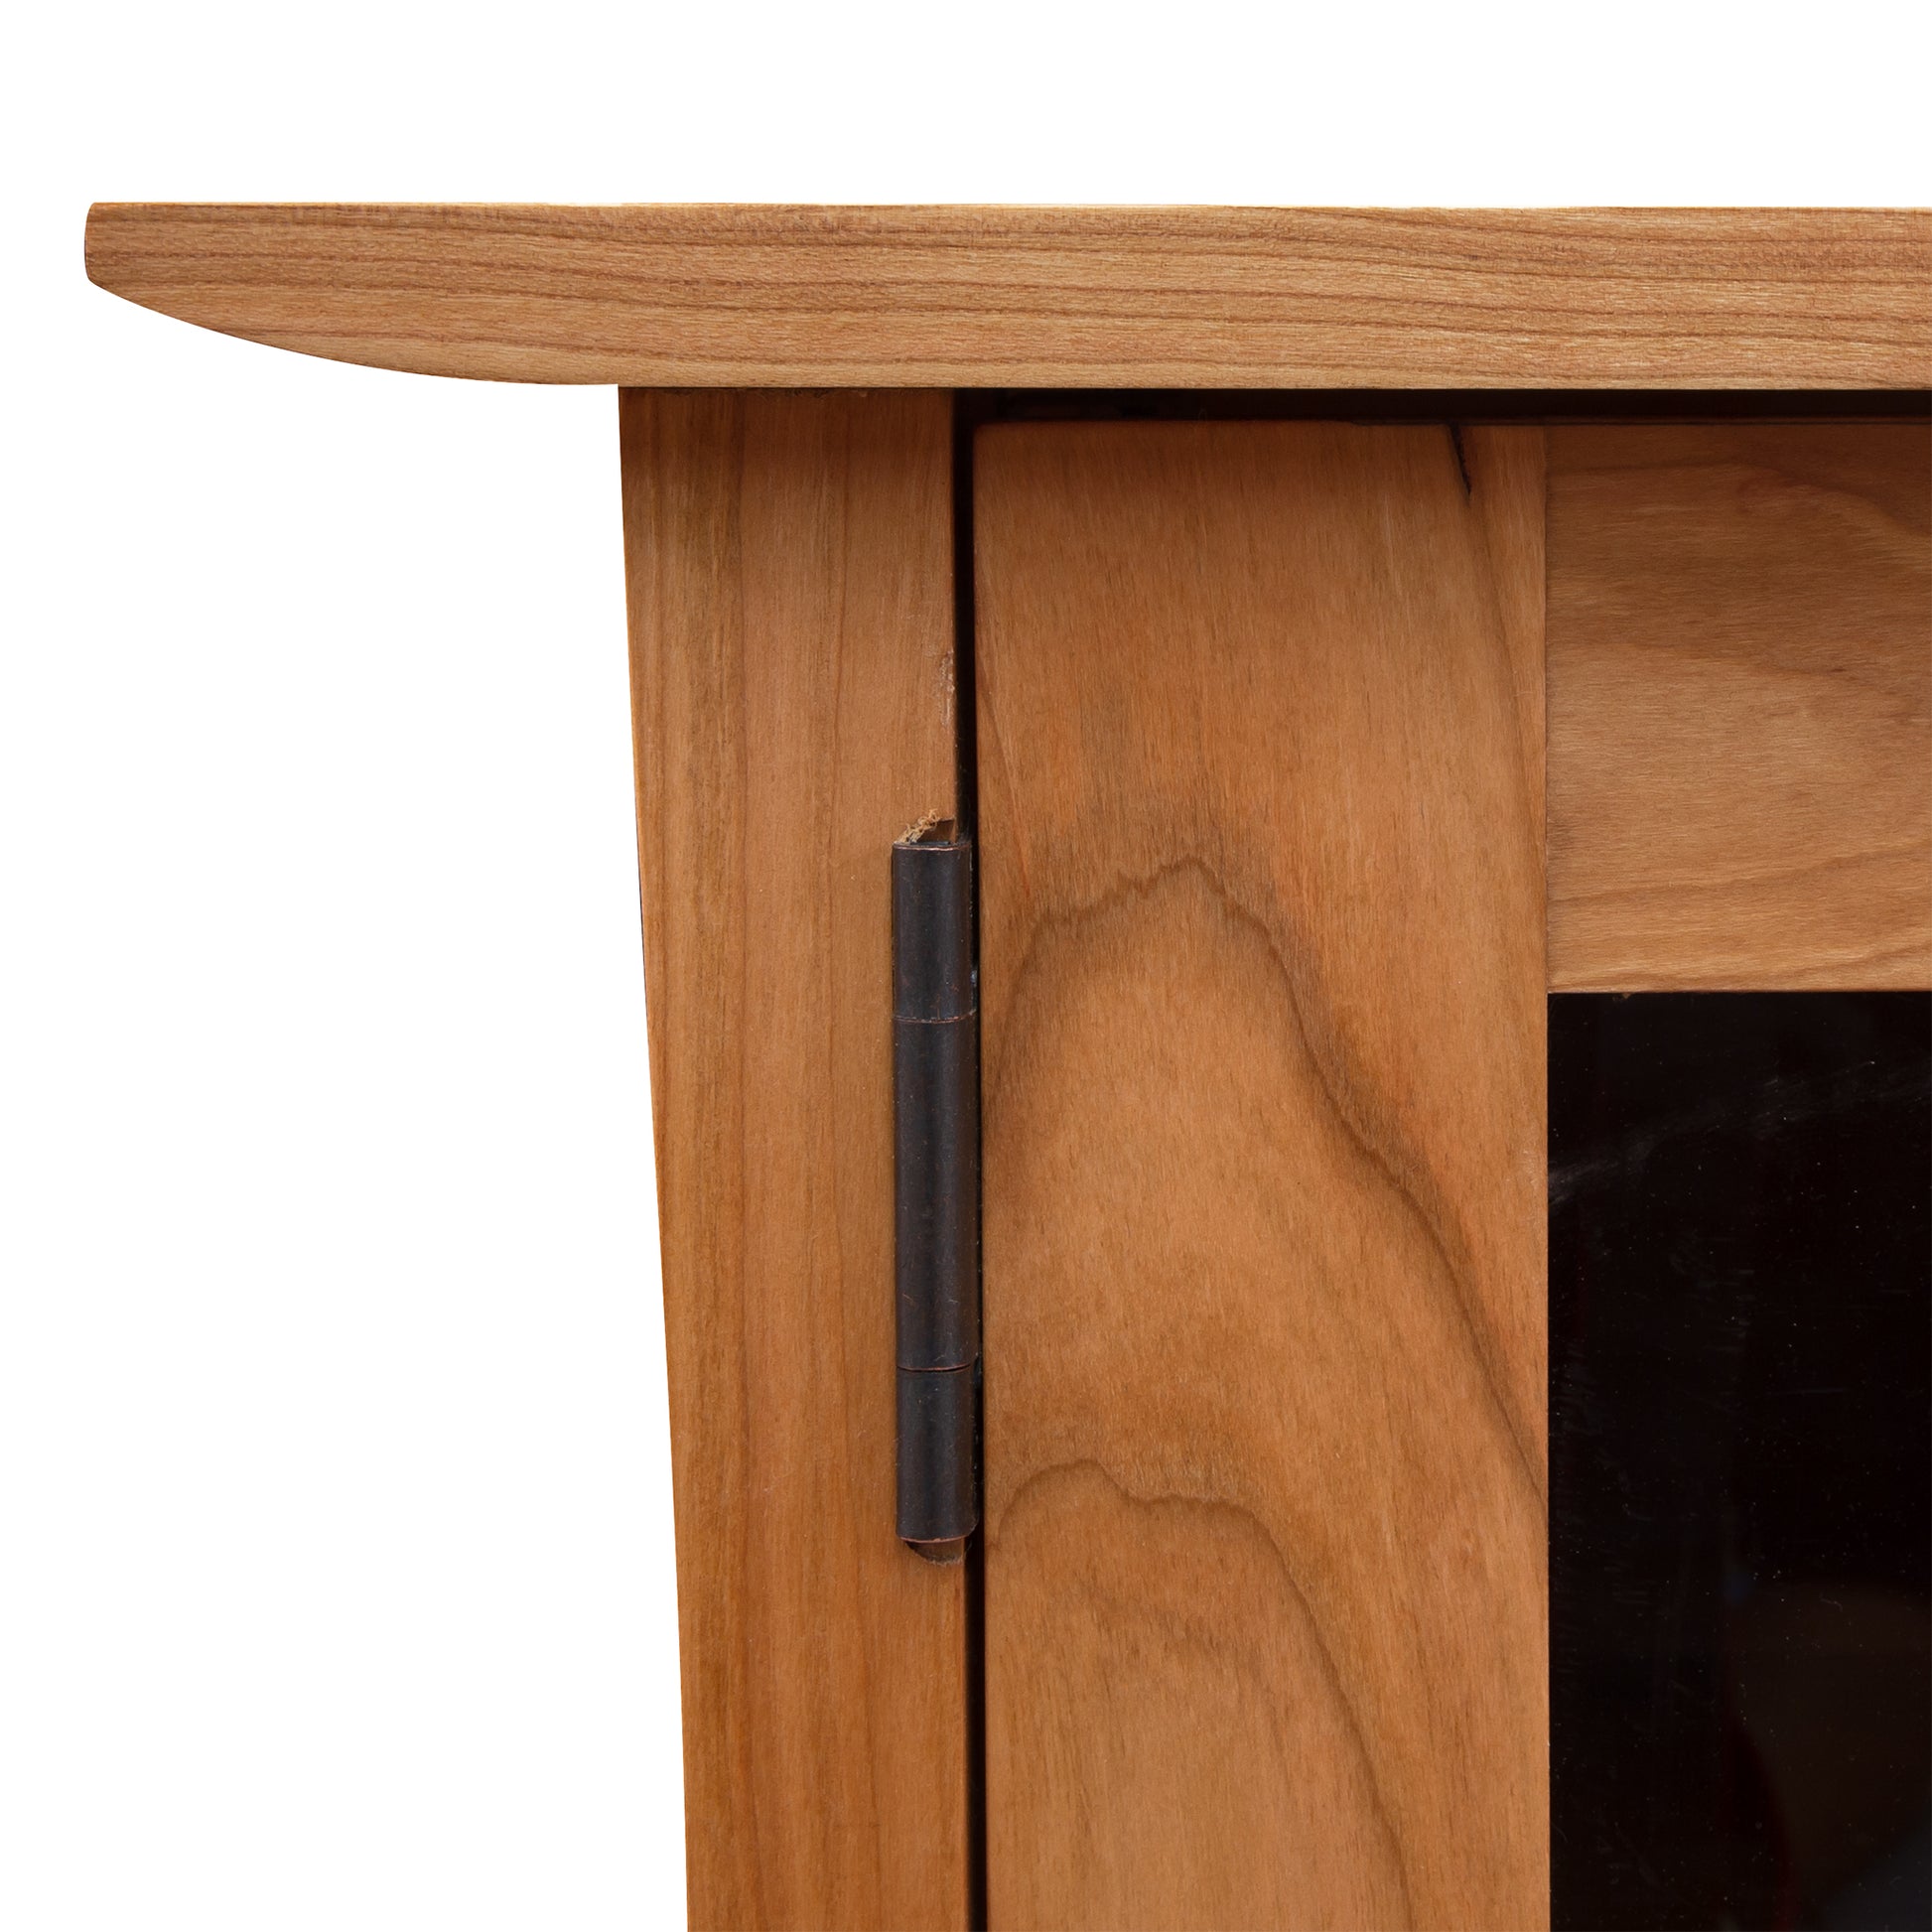 Close-up of a Vermont Furniture Designs Contemporary Craftsman 3-Drawer Media Console corner showing a detailed view of the table's edge and hinge, set against a white background.